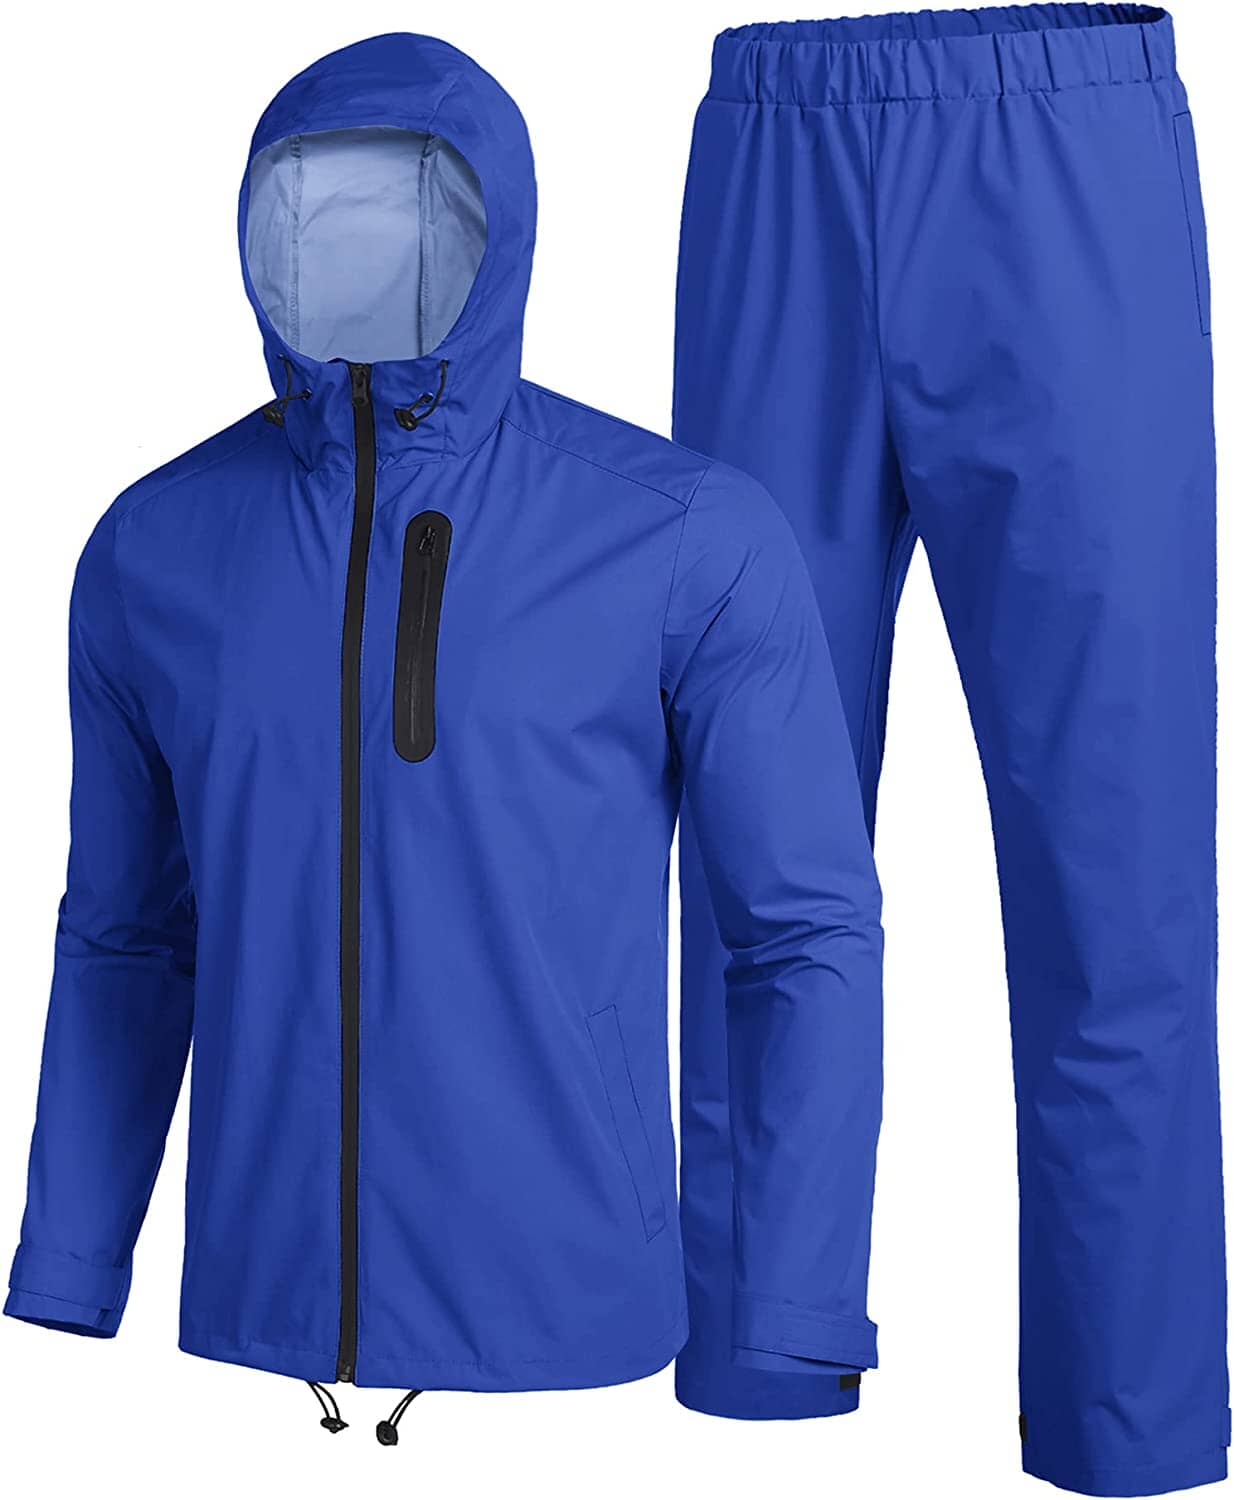 Waterproof Lightweight Camping Rain Suit (US Only) Sports Set COOFANDY Store Blue S 